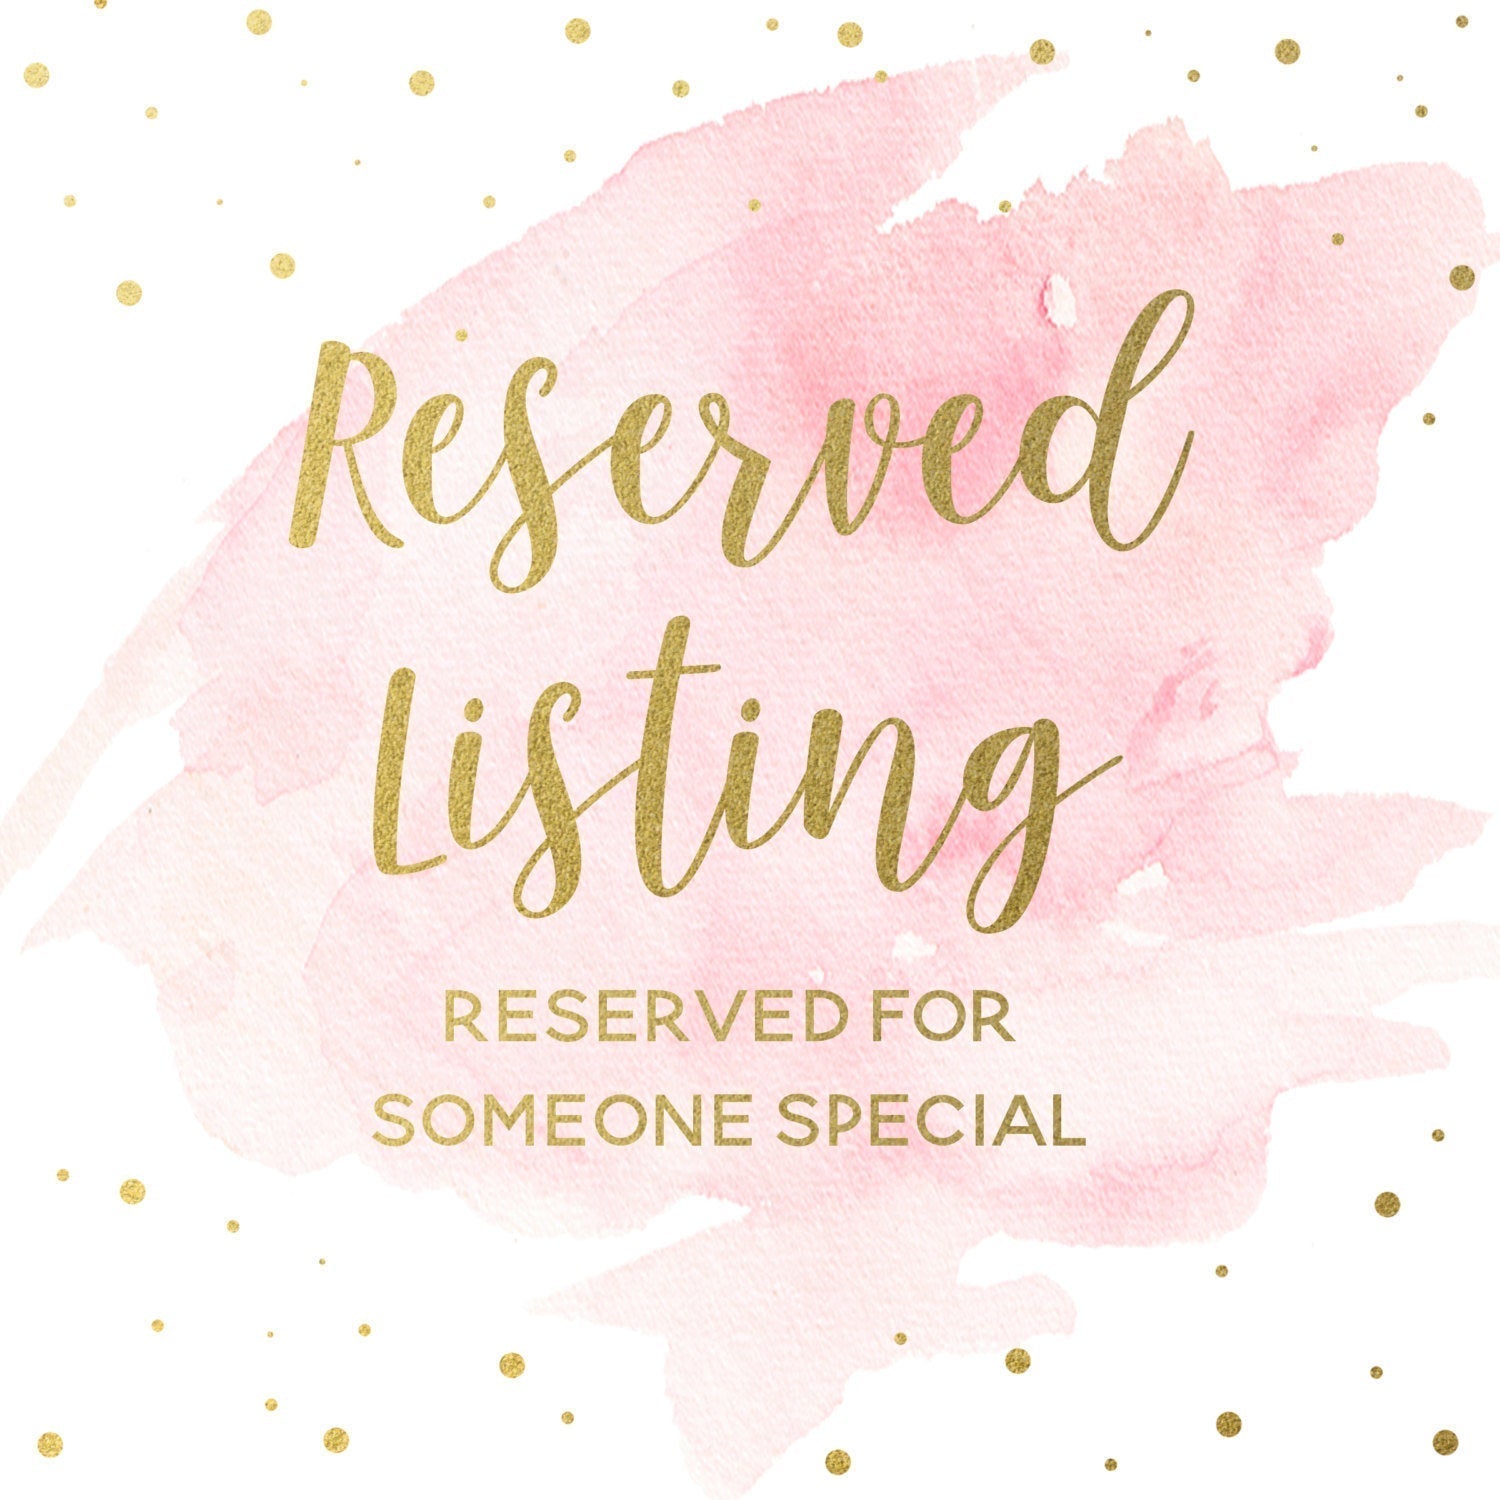 Reserved Listing - M Reese